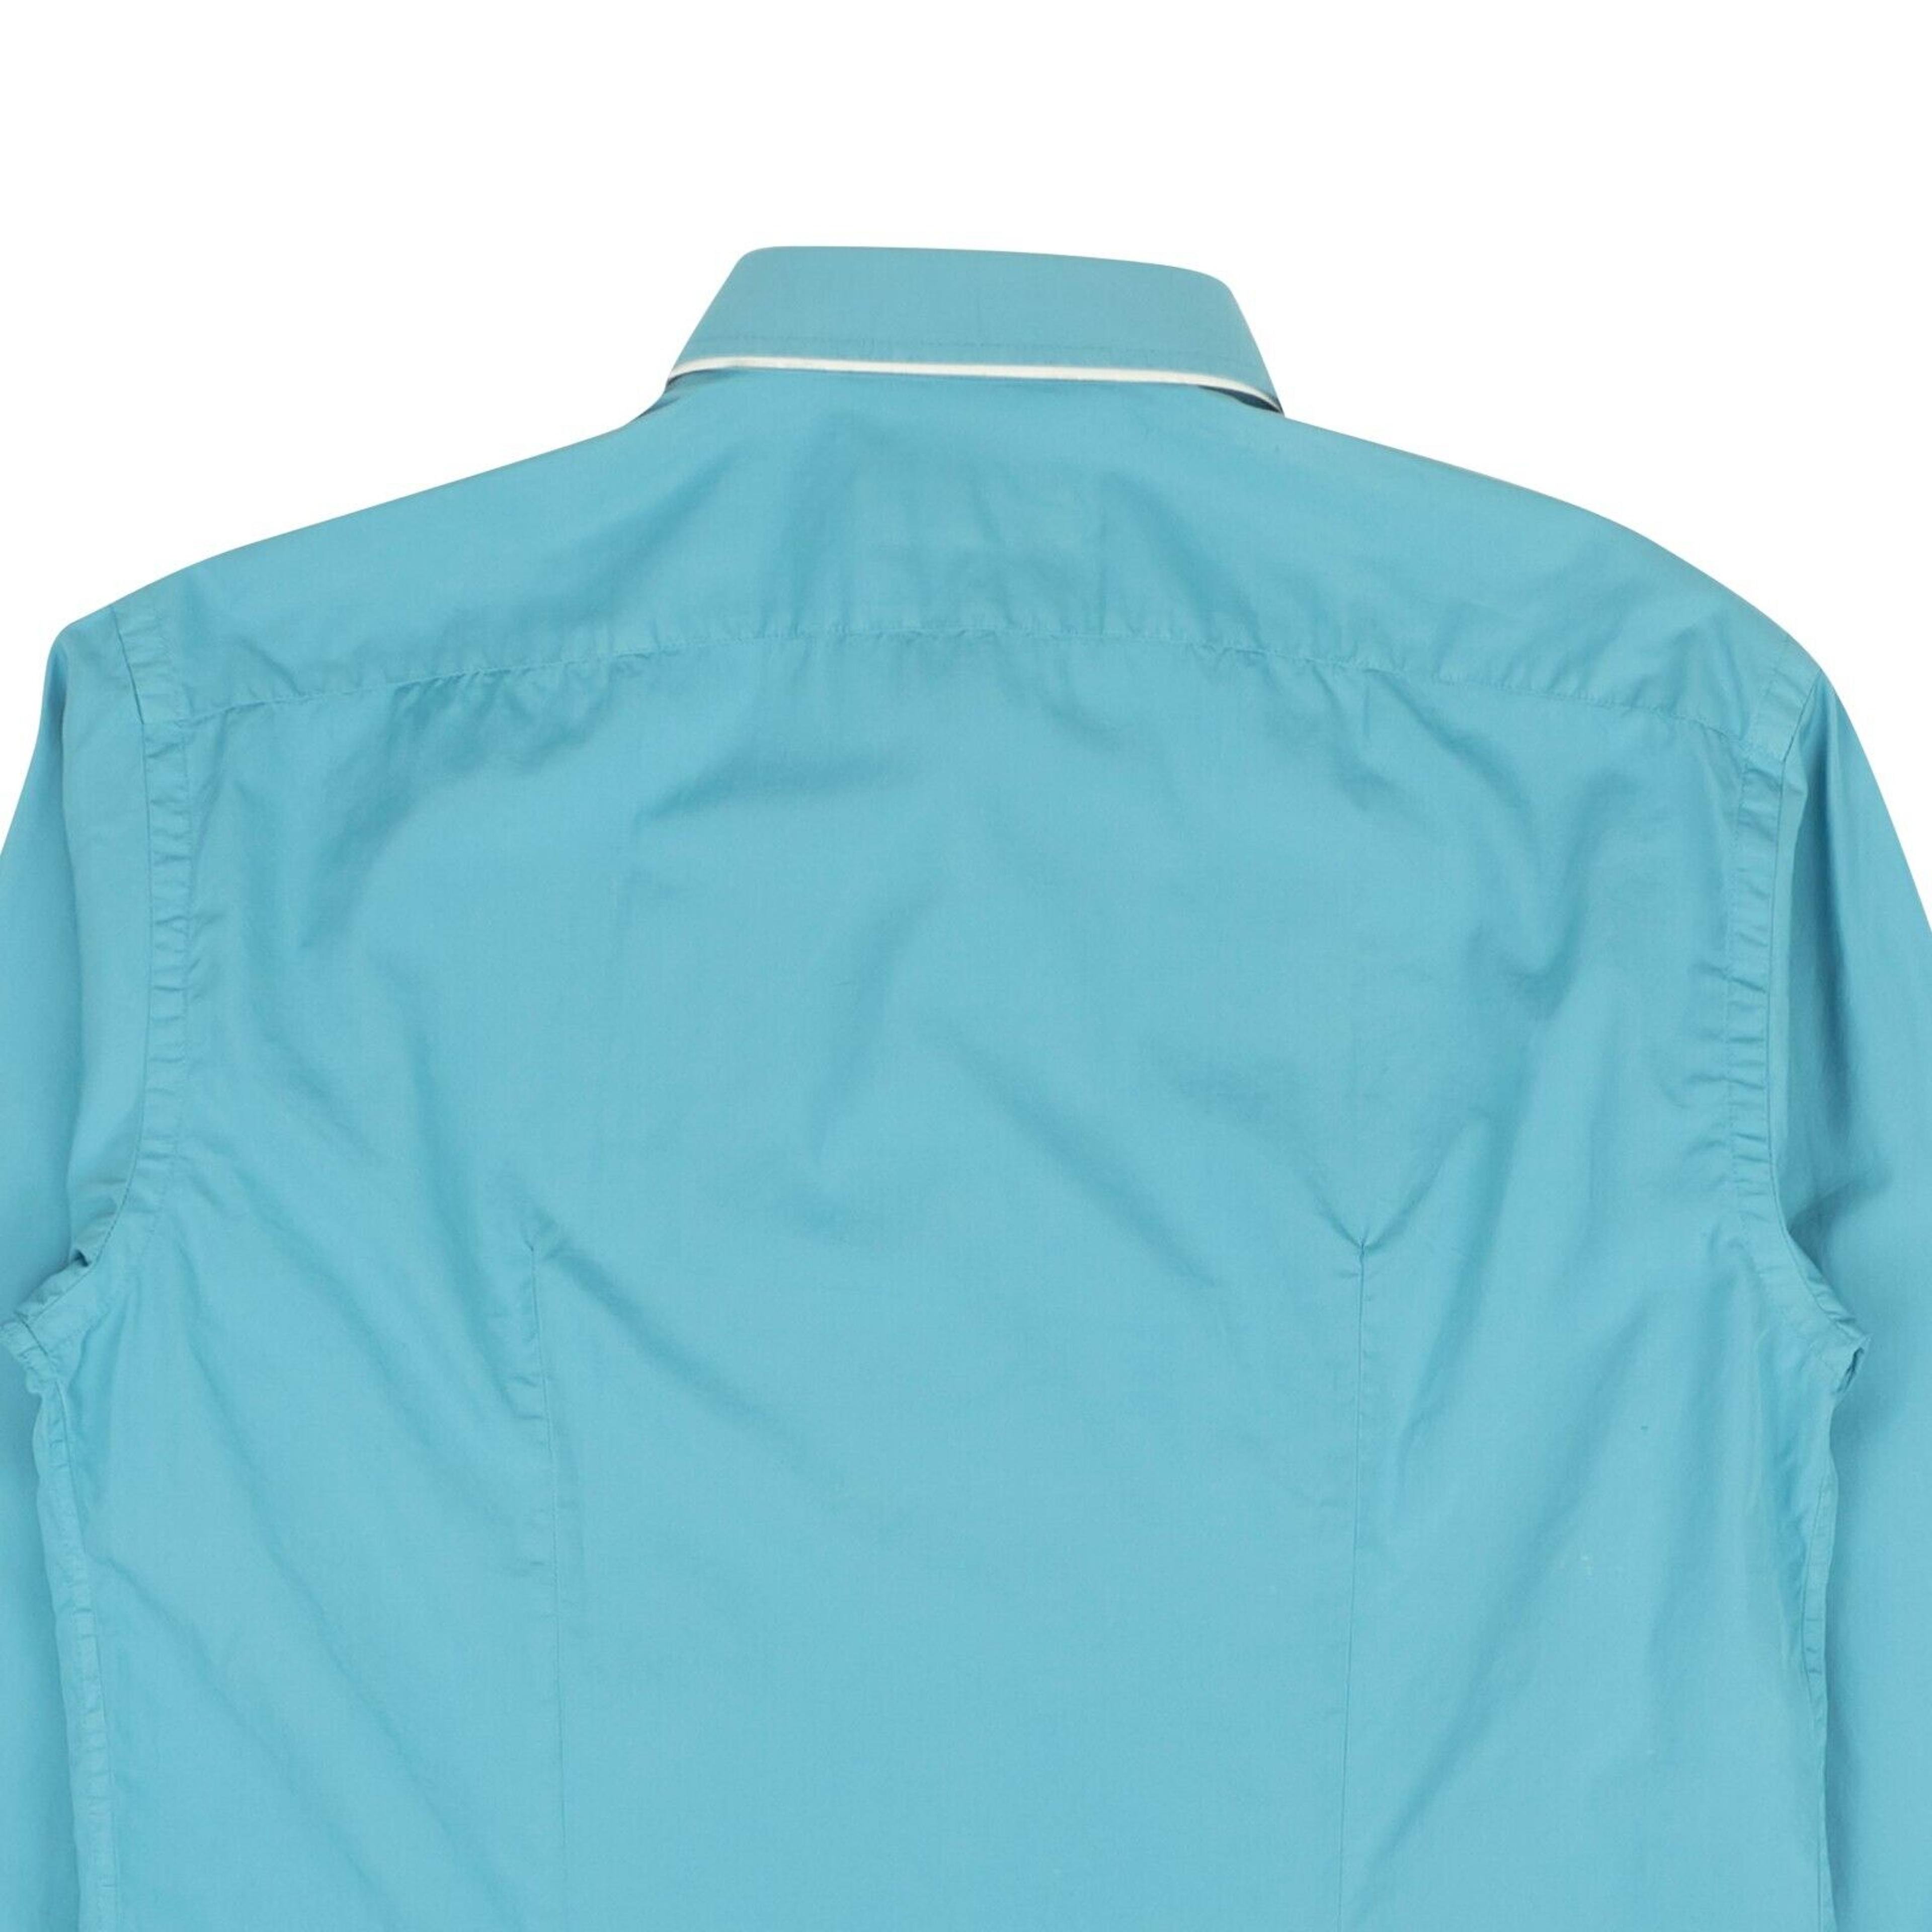 Alternate View 3 of Teal Blue Slim-Fit Long Sleeve Cotton Casual Shirt